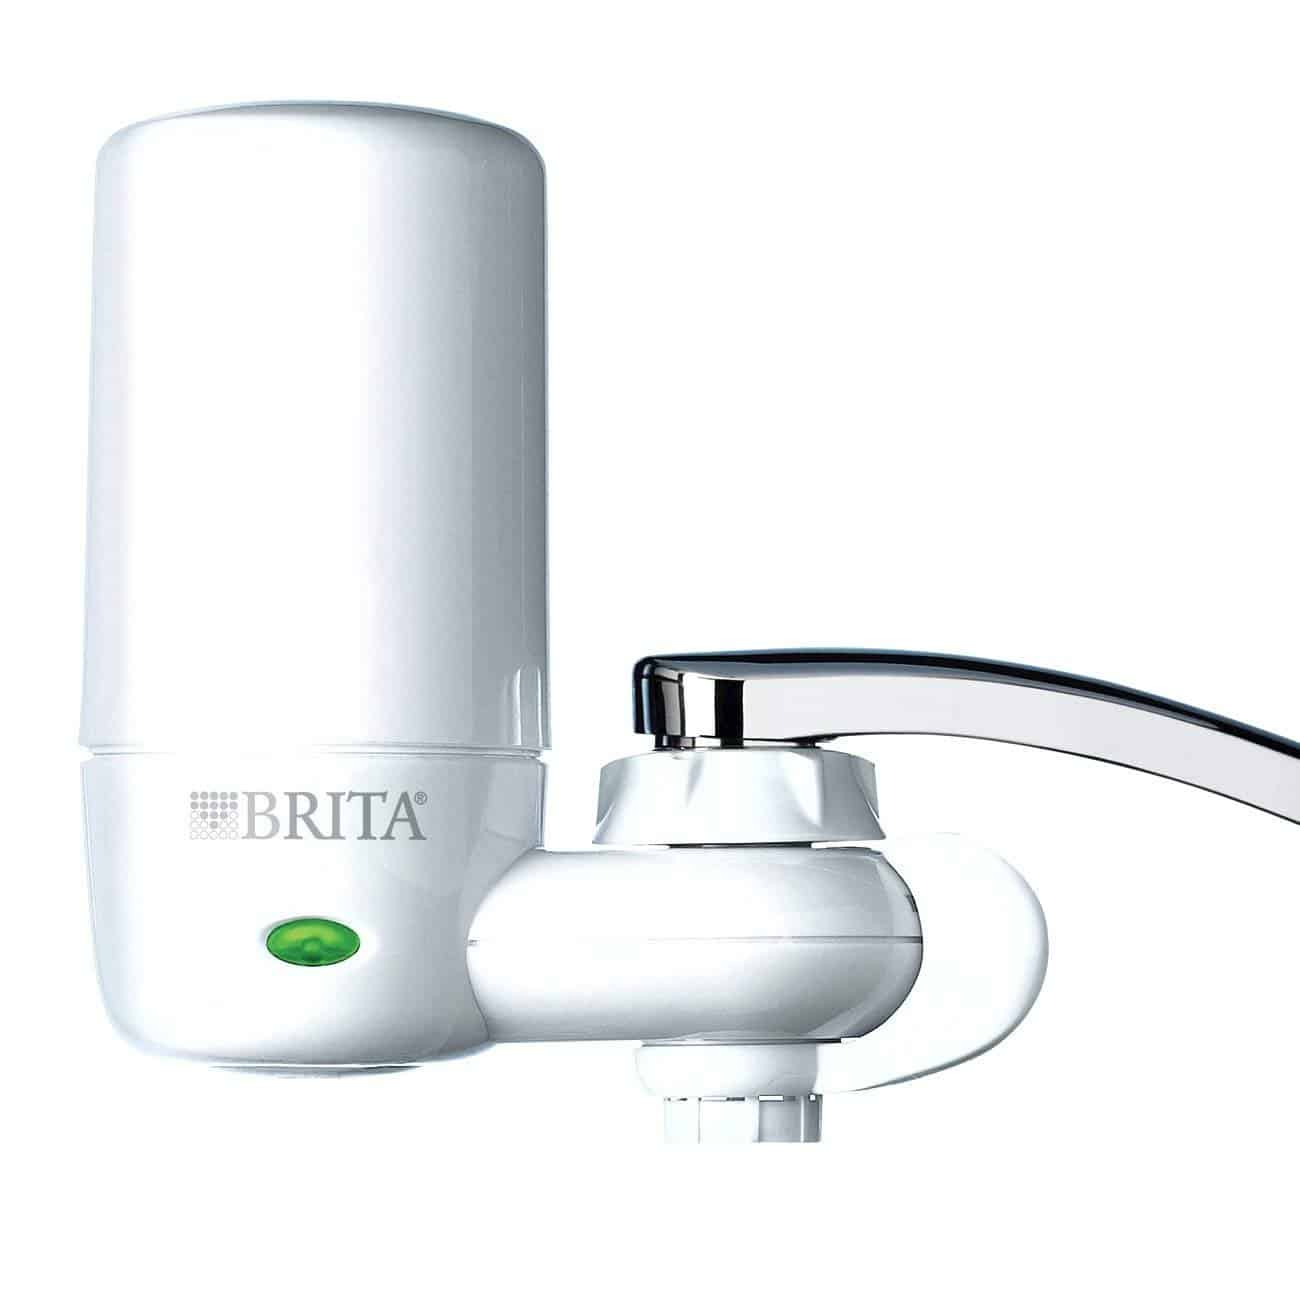 5 Brita Water Filters To Help You Drink More Water 3